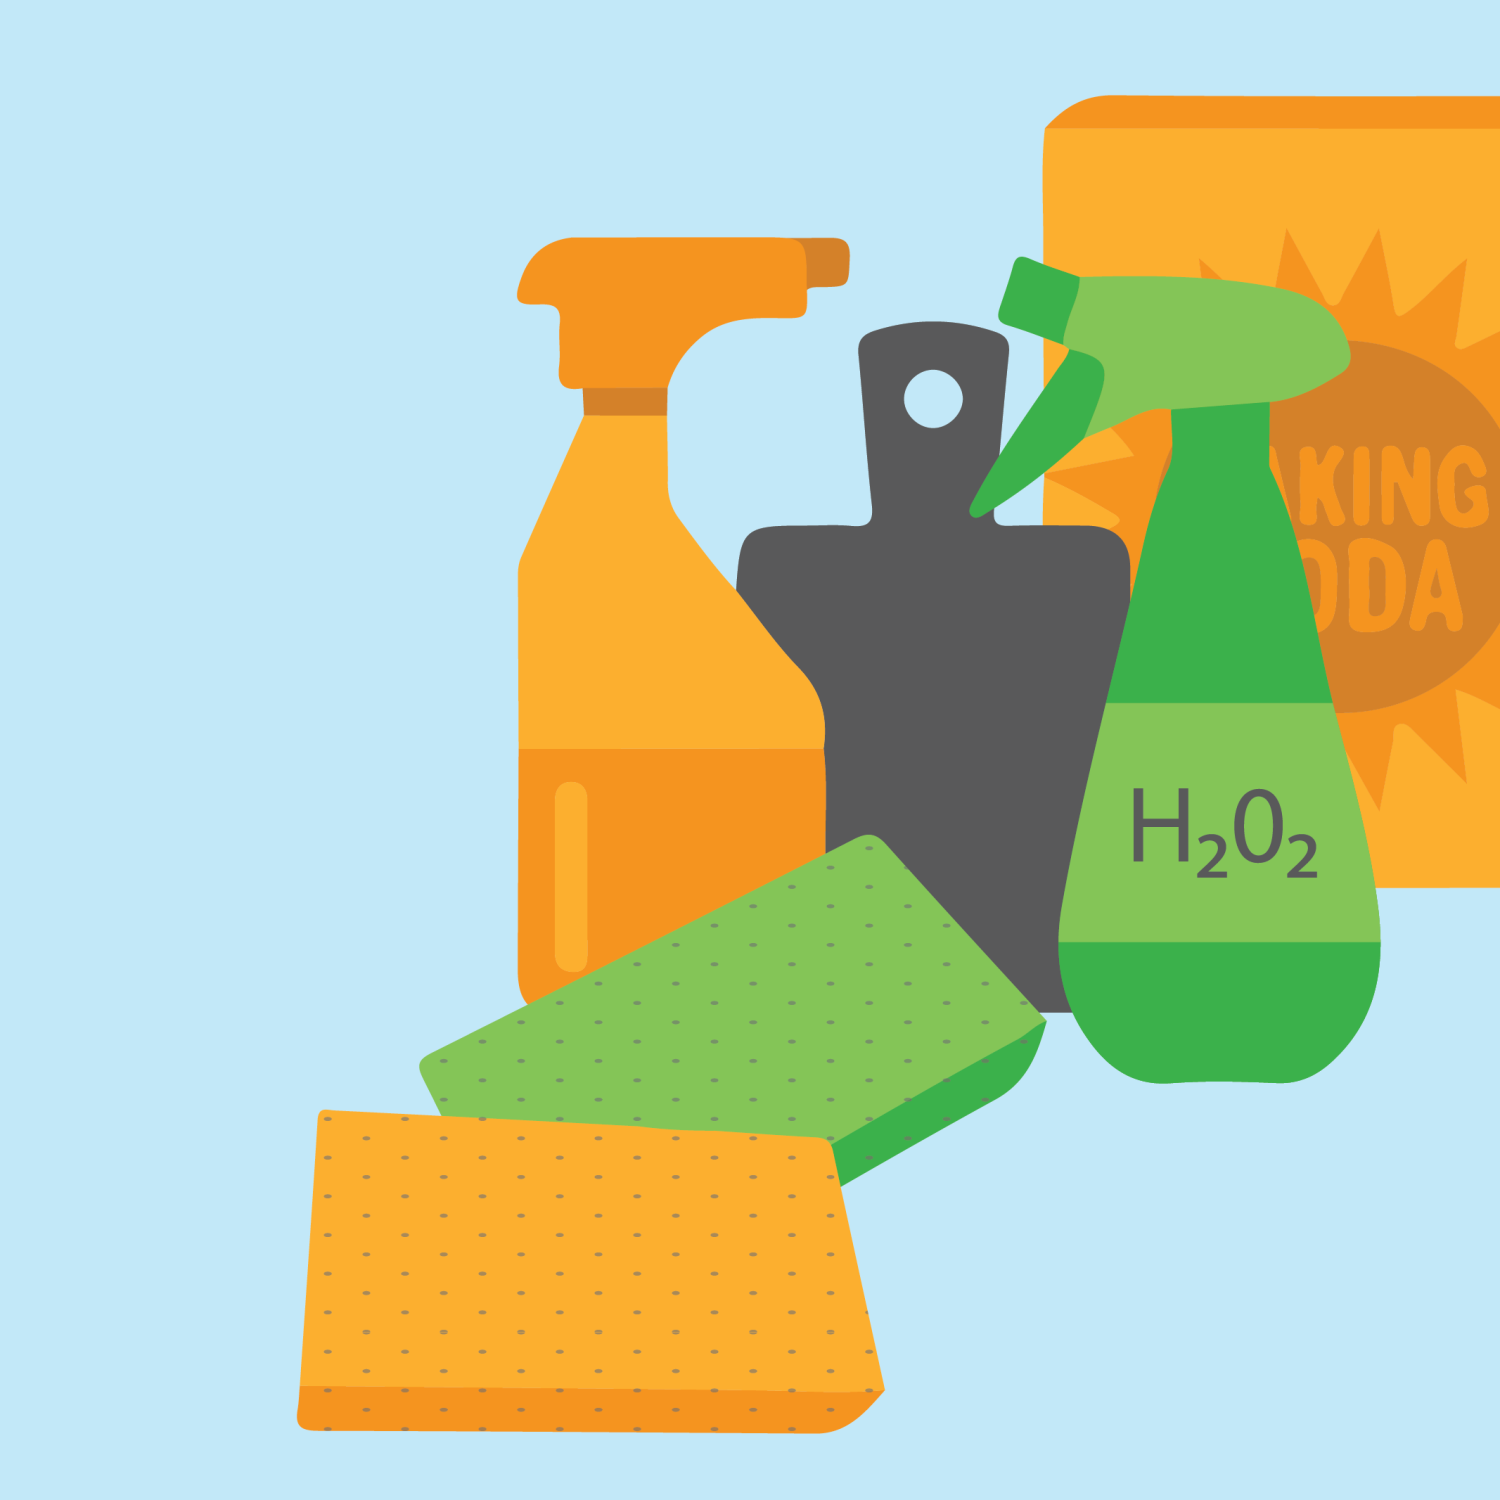 graphic of supplies to clean your house with hydrogen peroxide two spray bottles with h202 on one bottle and a box of baking soda and sponges